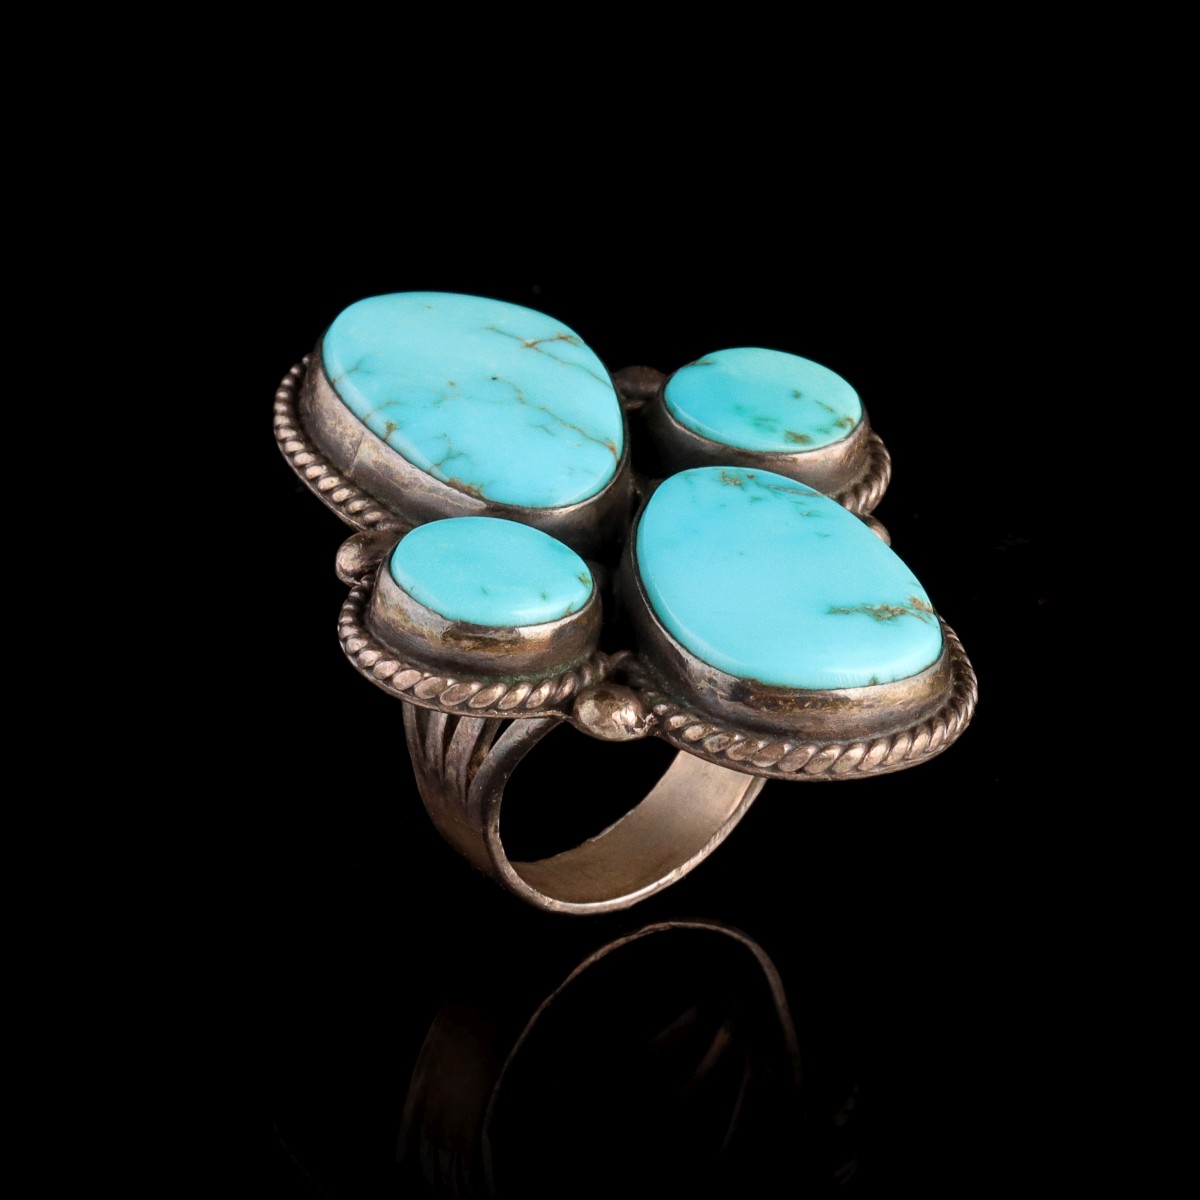 A NAVAJO MEN'S STERLING SILVER AND TURQUOISE RING